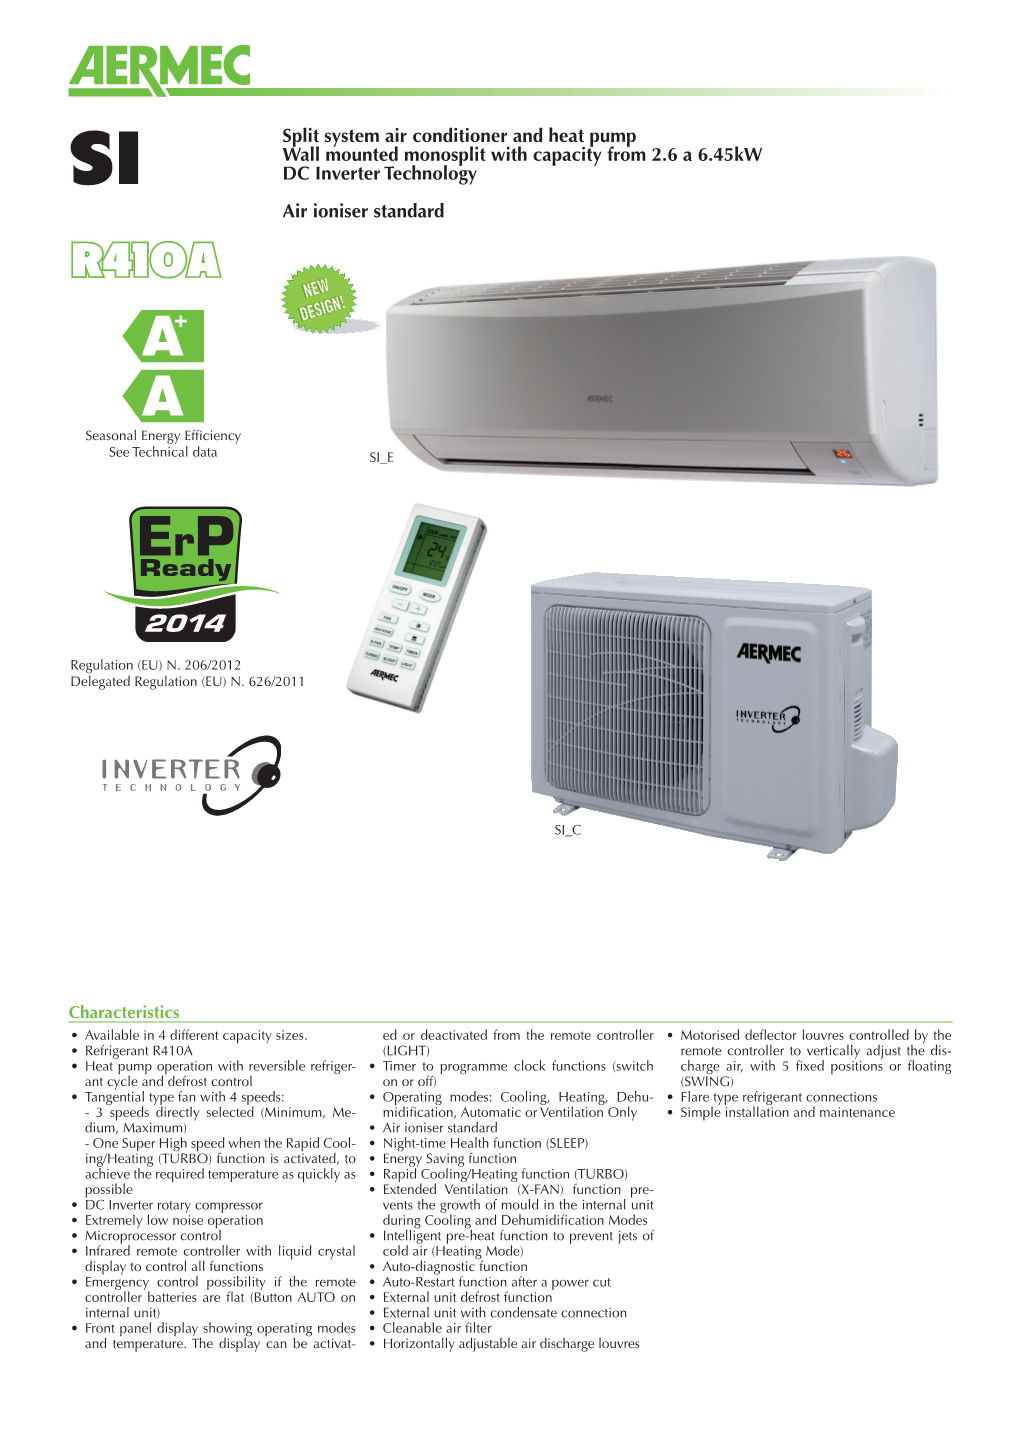 Split System Air Conditioner and Heat Pump Wall Mounted Monosplit with Capacity from 2.6 a 6.45Kw DC Inverter Technology Air